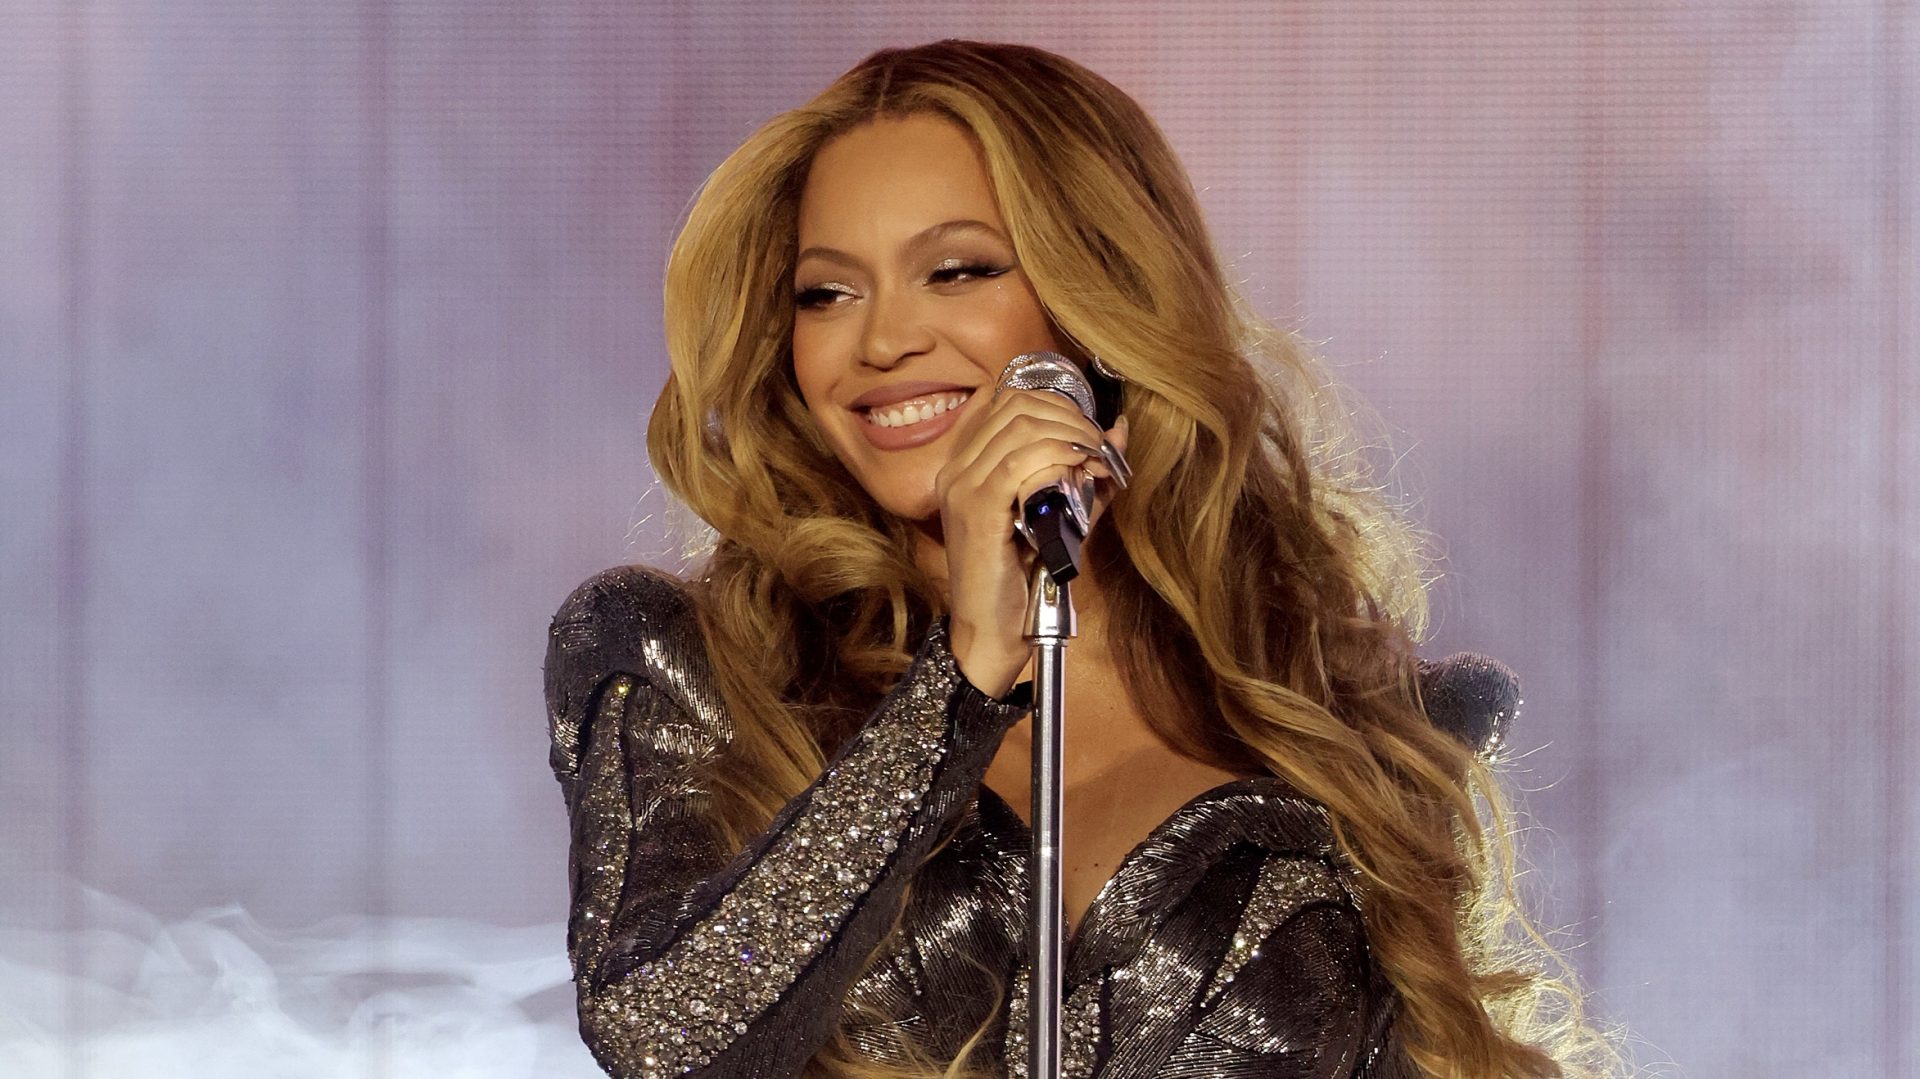 Beyonce Steps Into Her Influencer BAG While Unboxing Her New Perfume CE NOIR Video scaled